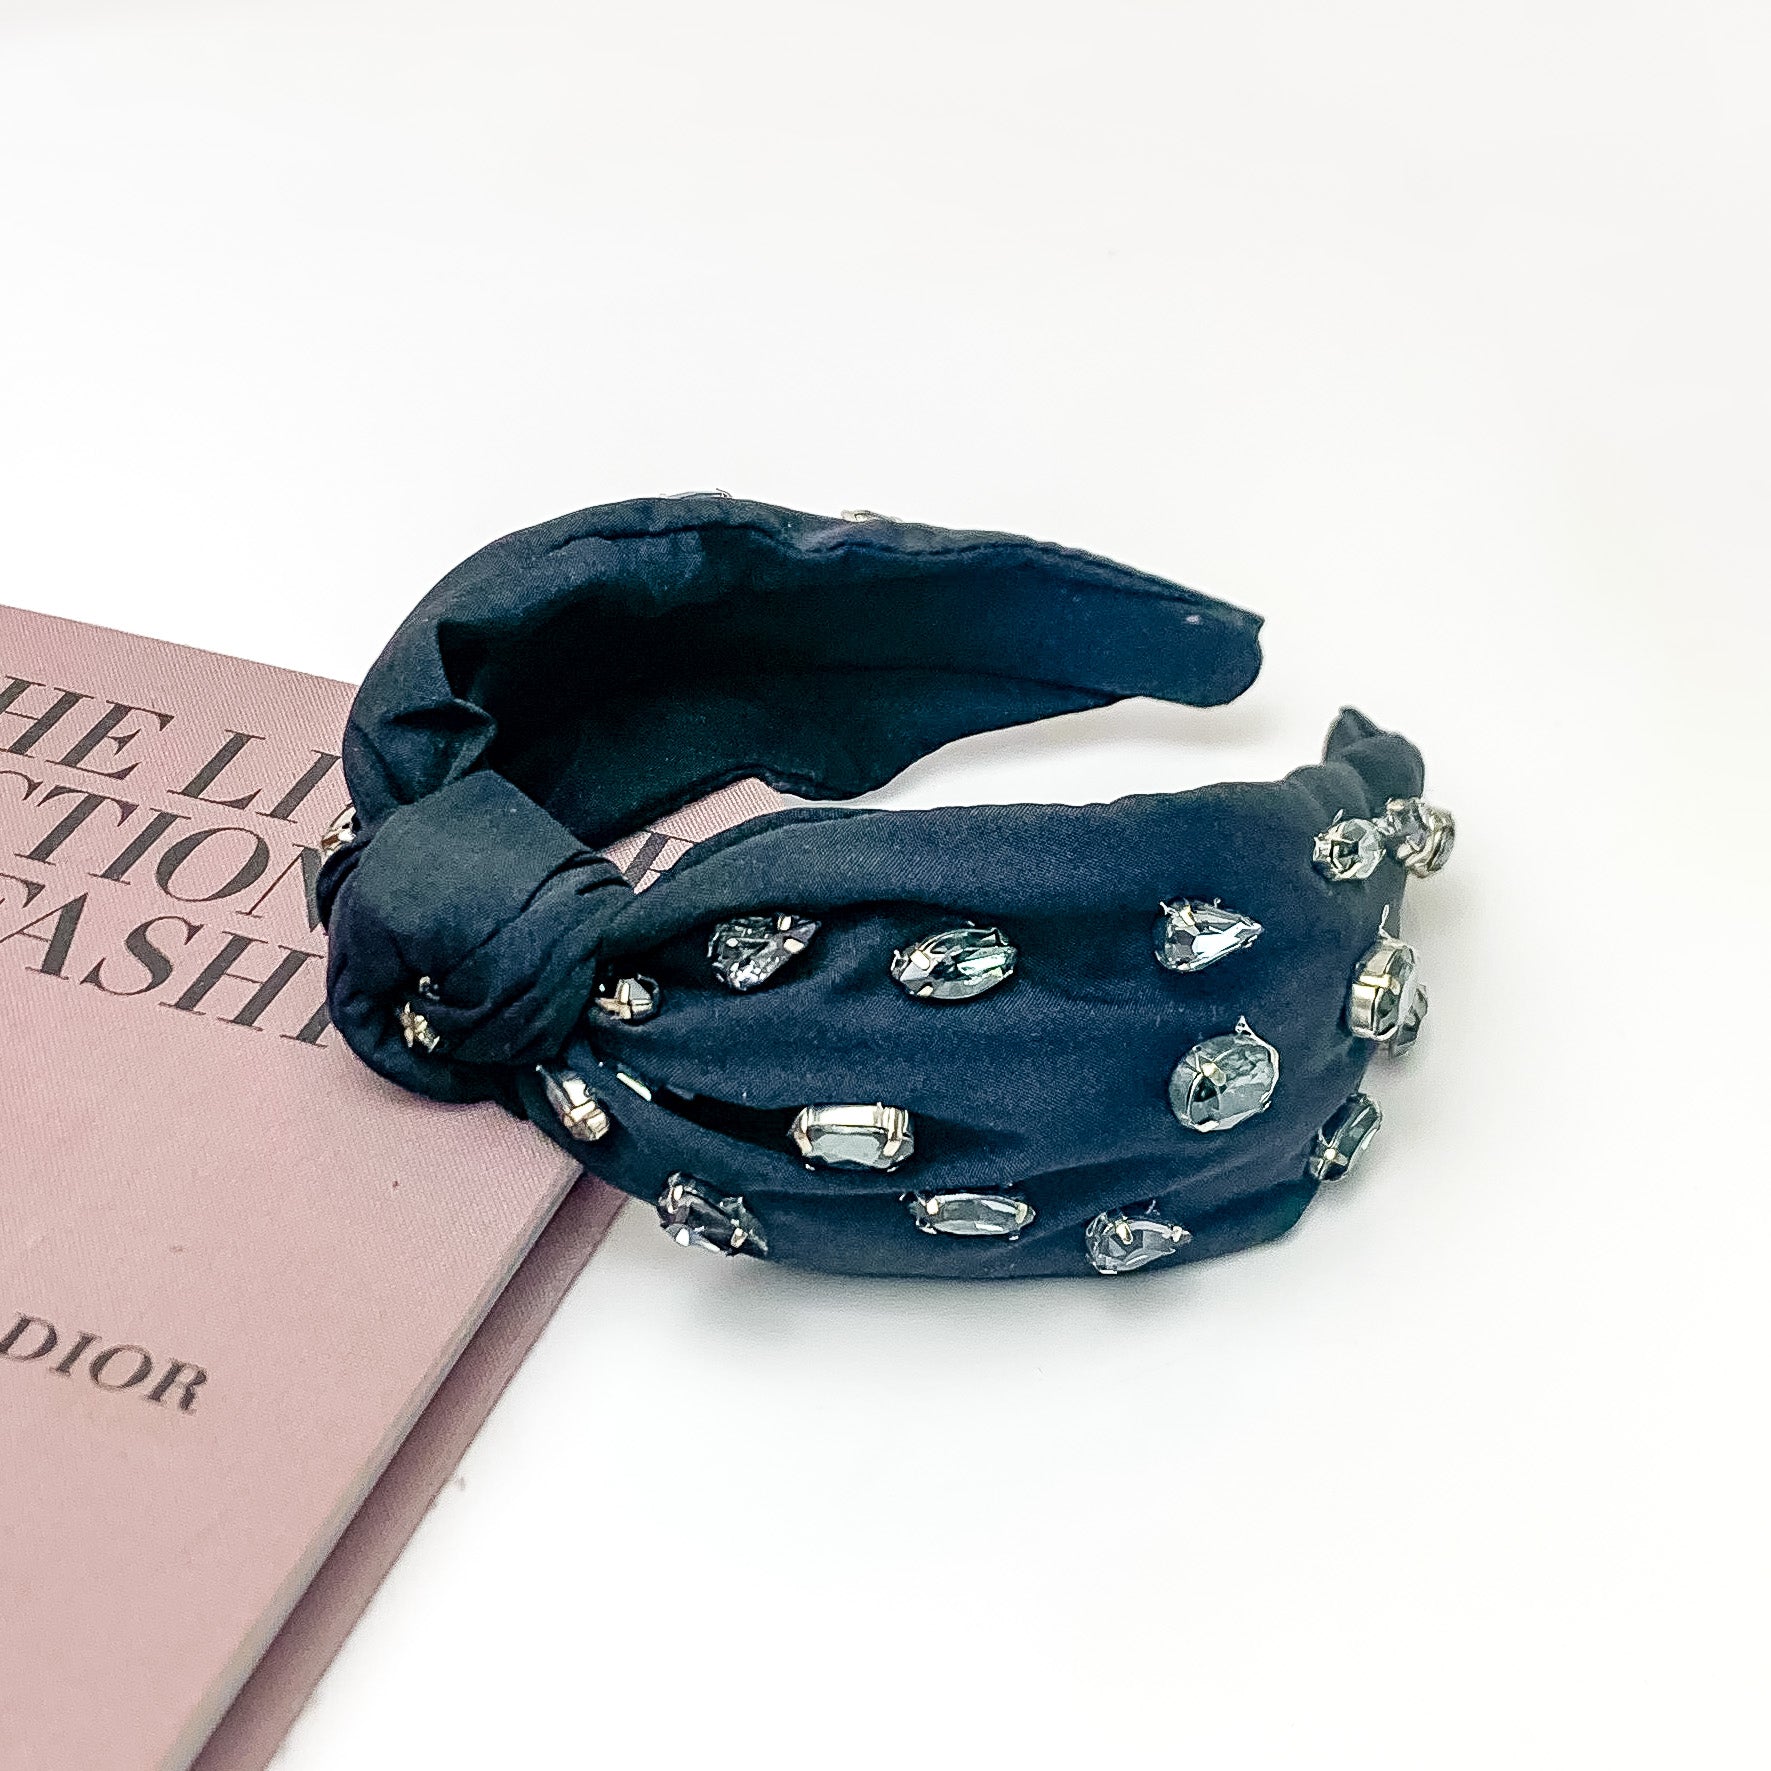 Crystal Detailed Knot Headband in Black. Pictured on a white background with the headband laying against a pink book.